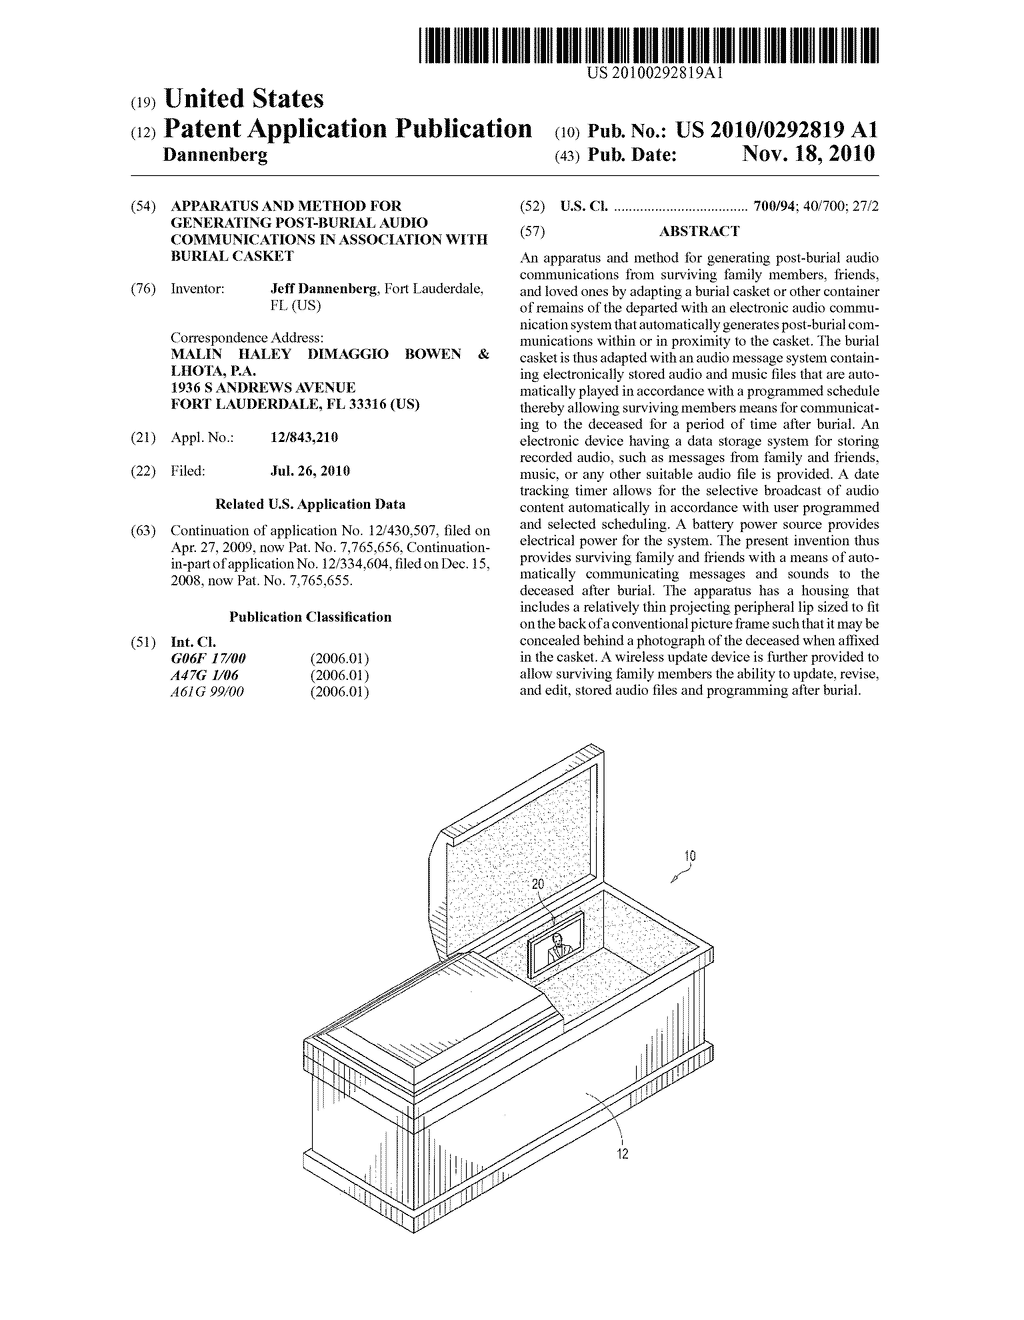 APPARATUS AND METHOD FOR GENERATING POST-BURIAL AUDIO COMMUNICATIONS IN ASSOCIATION WITH BURIAL CASKET - diagram, schematic, and image 01